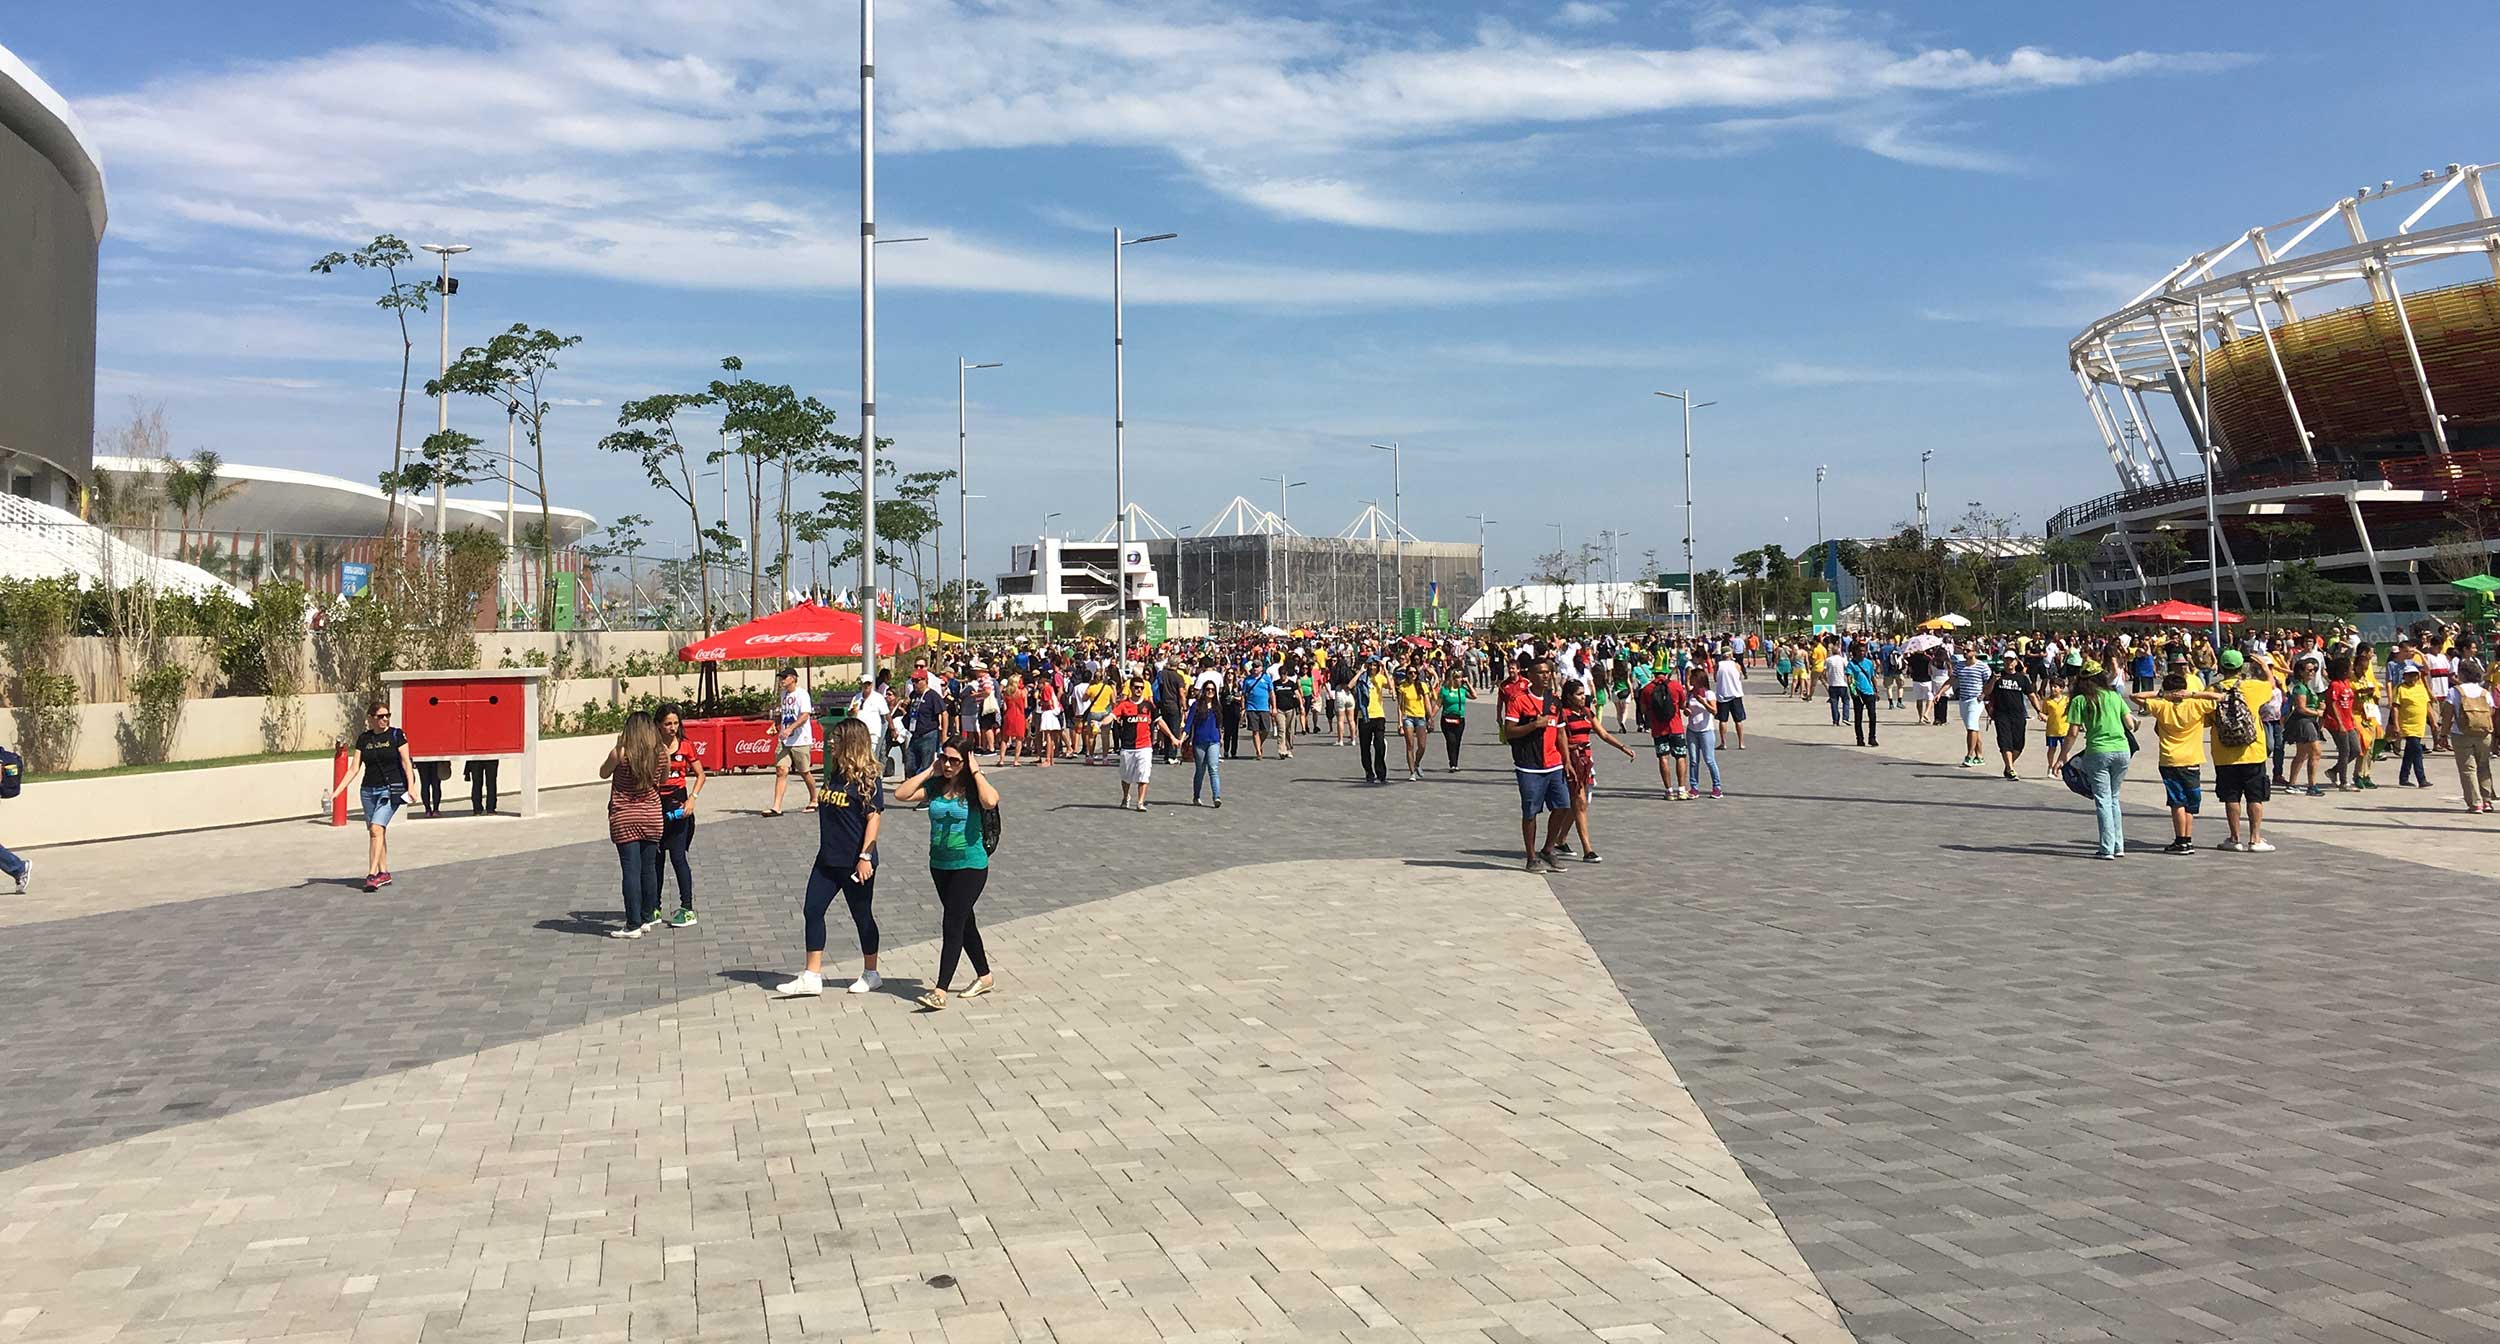 People walk in the Olympic Park in Rio de Janeiro